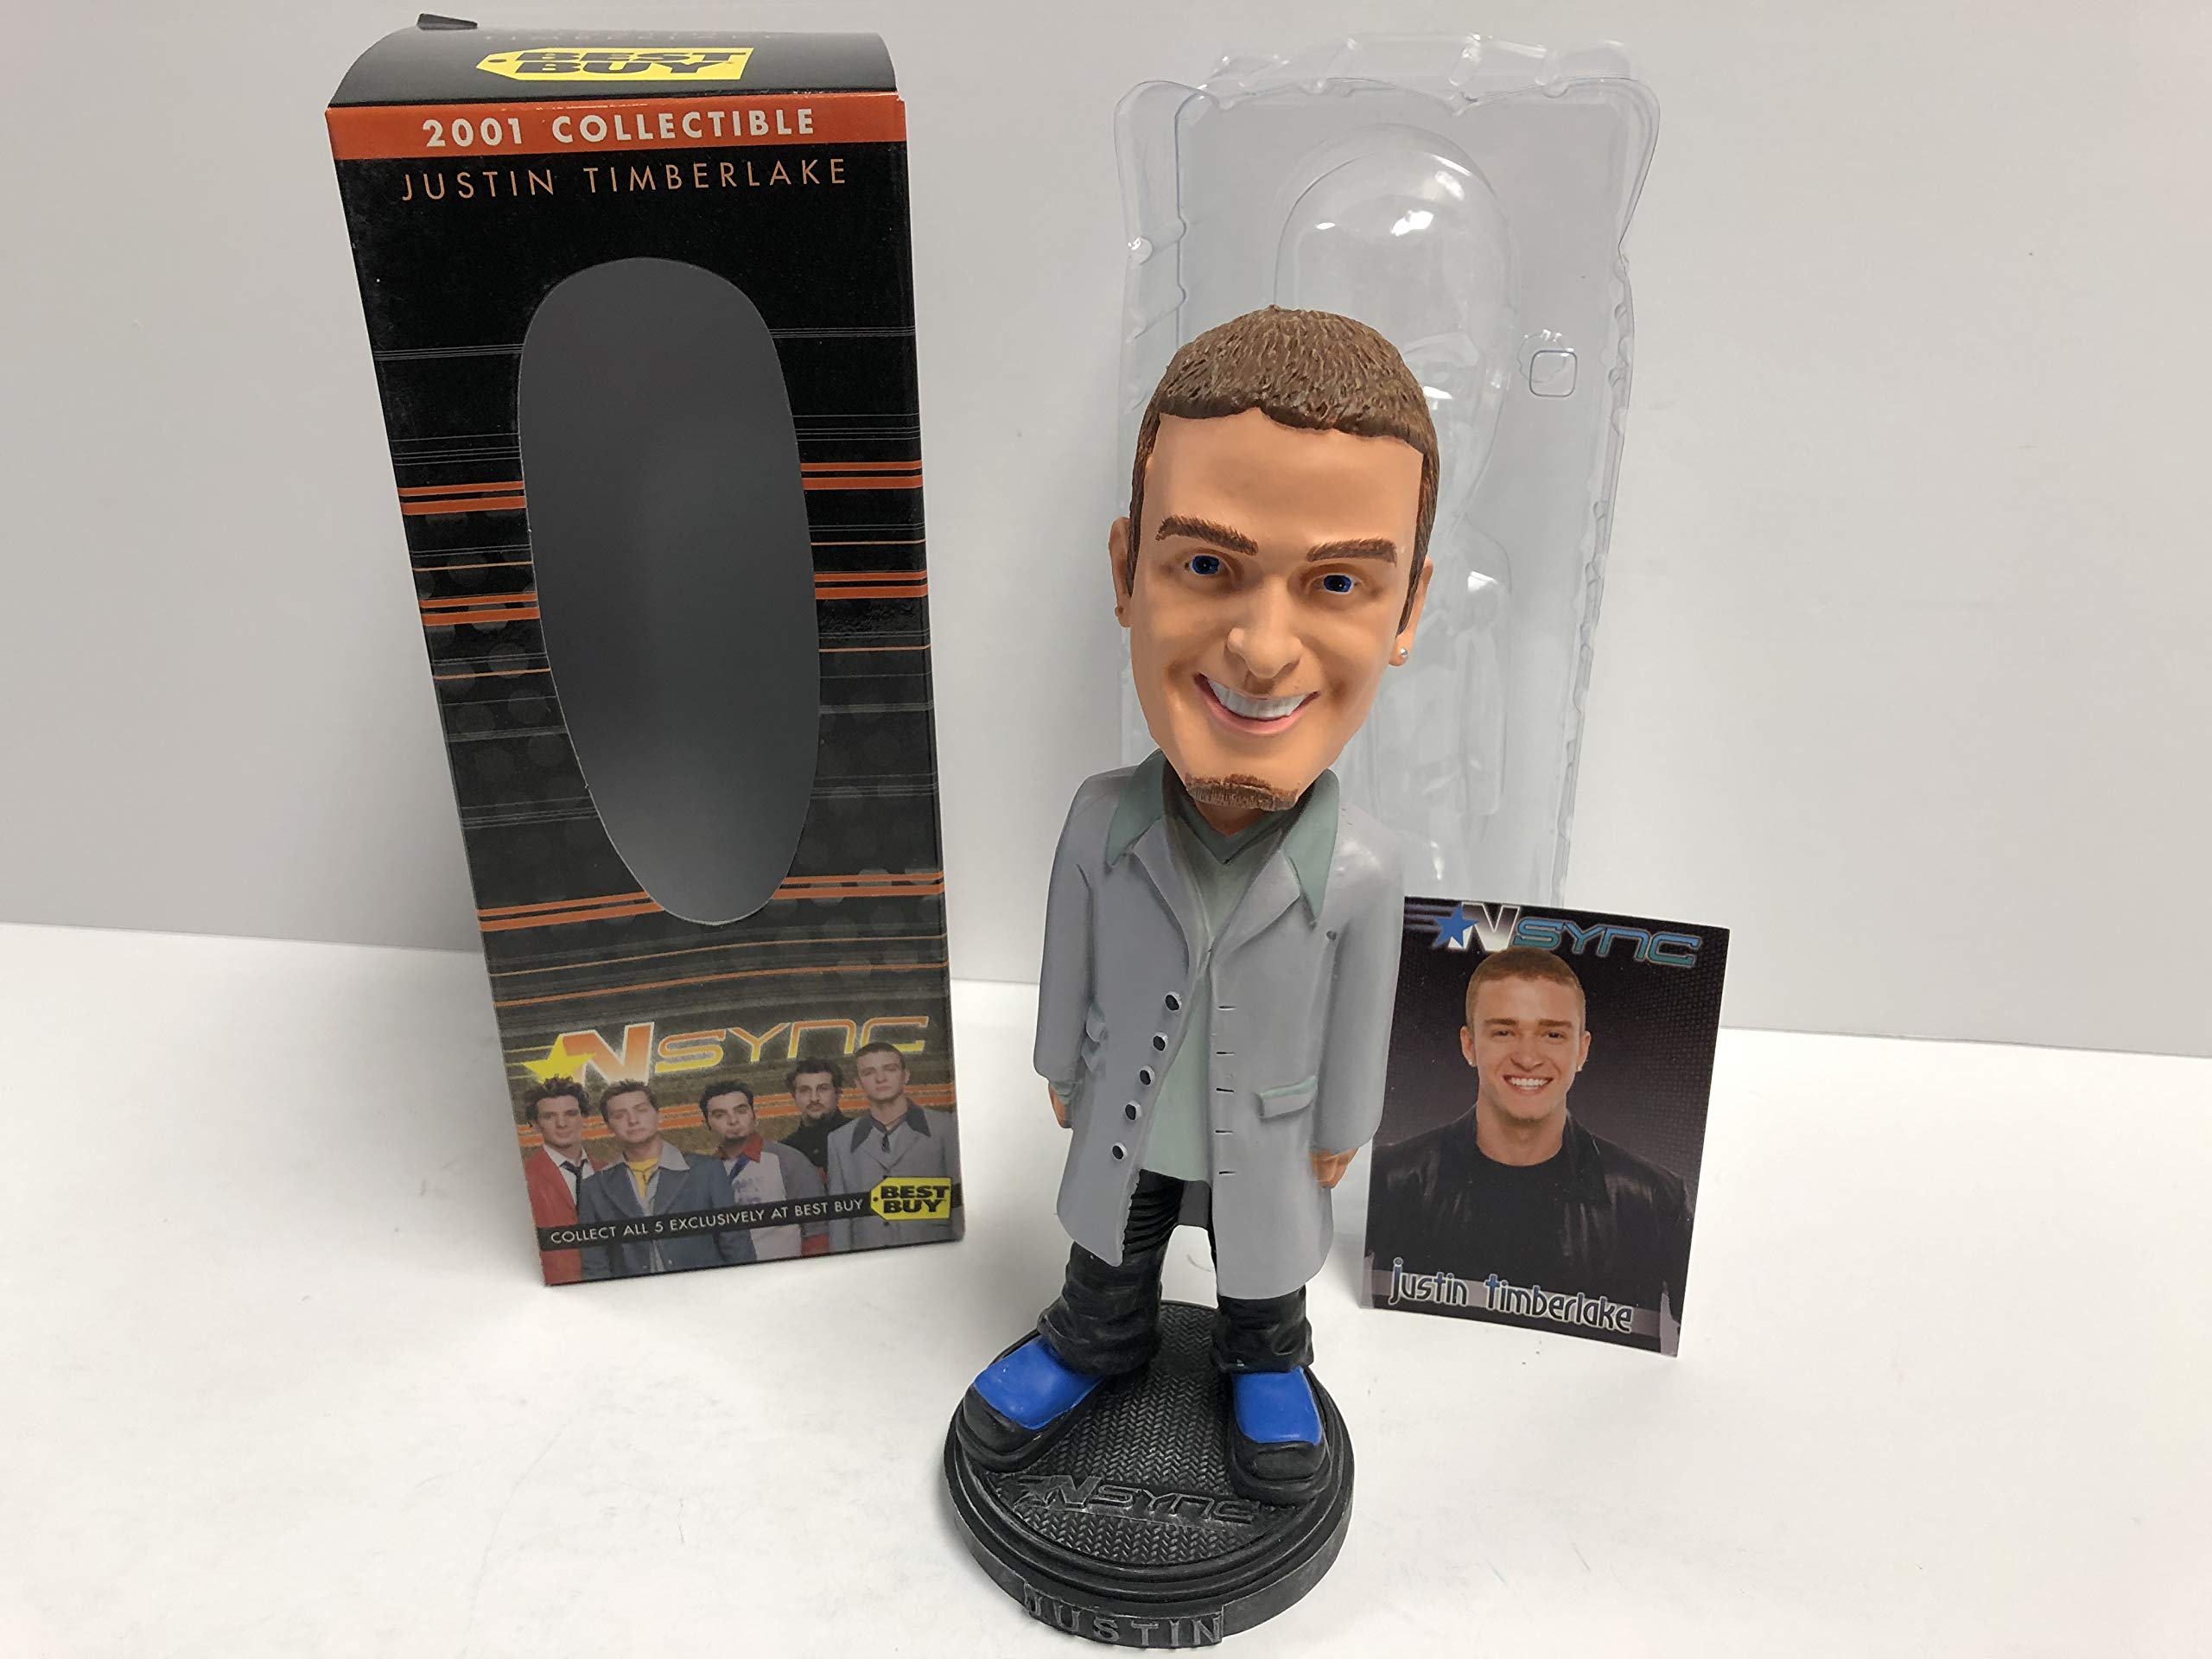 Justin Timberlake NSYNC Best BUY Promotional Bobble Bobblehead with trading card